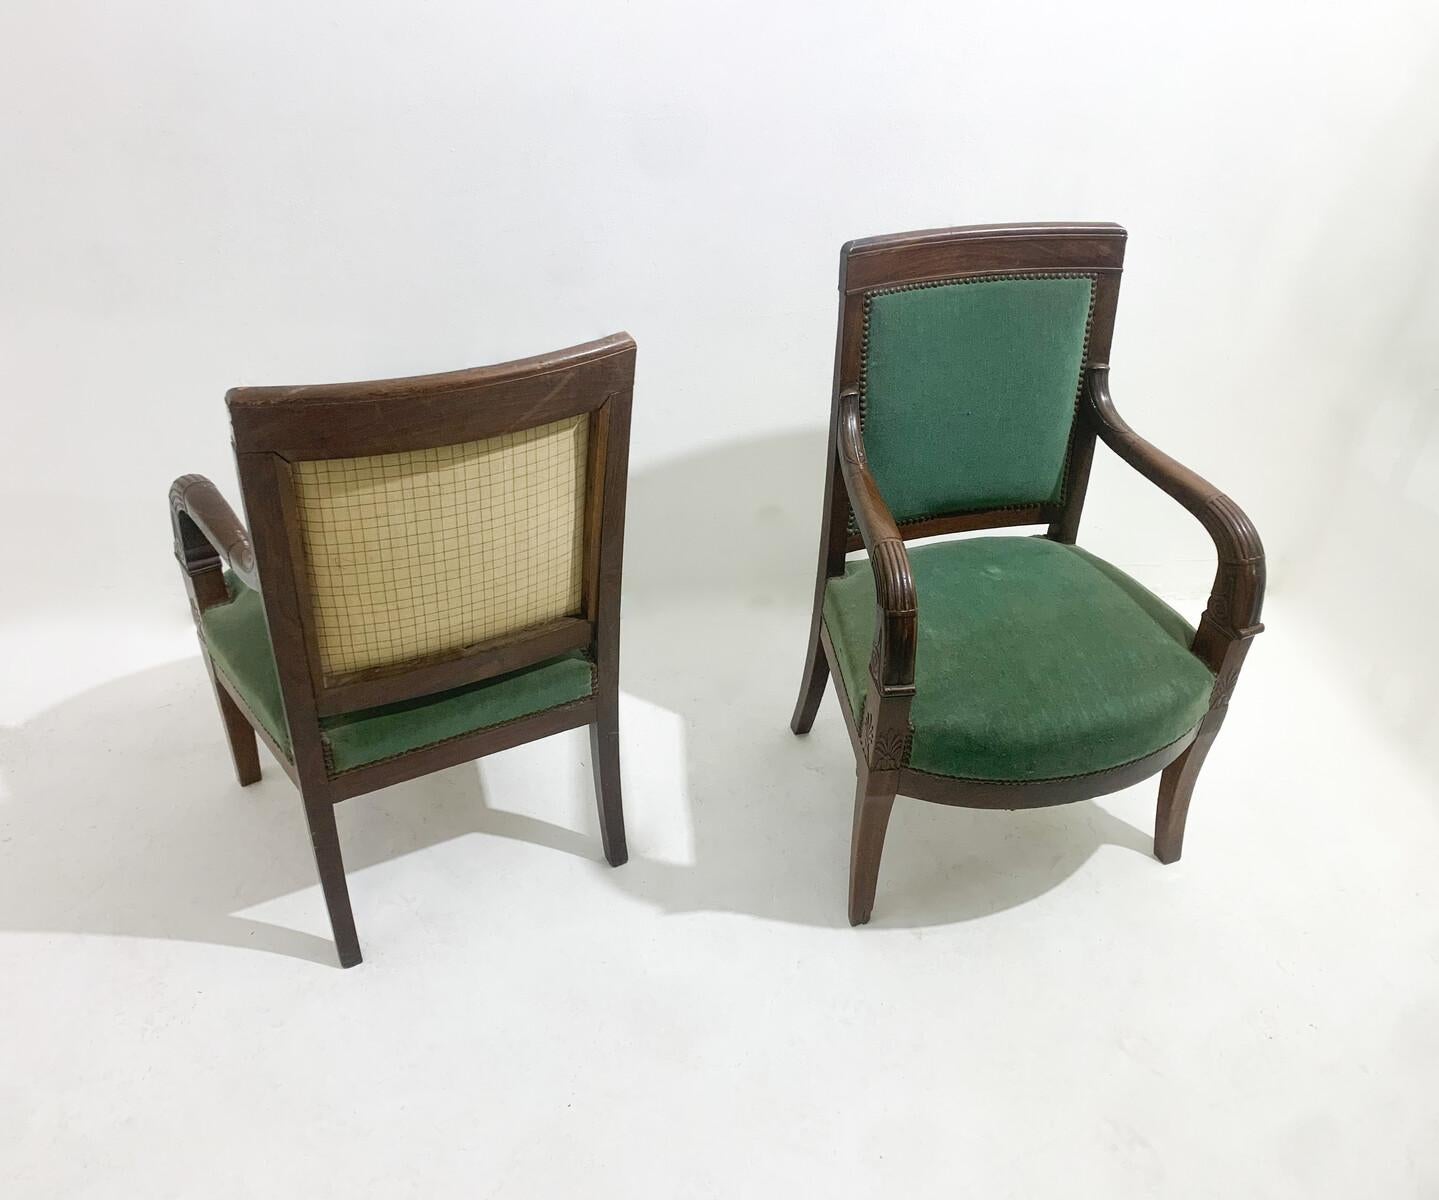 Velvet Pair of Green Armchairs, Empire, Mahogany, 19th Century For Sale